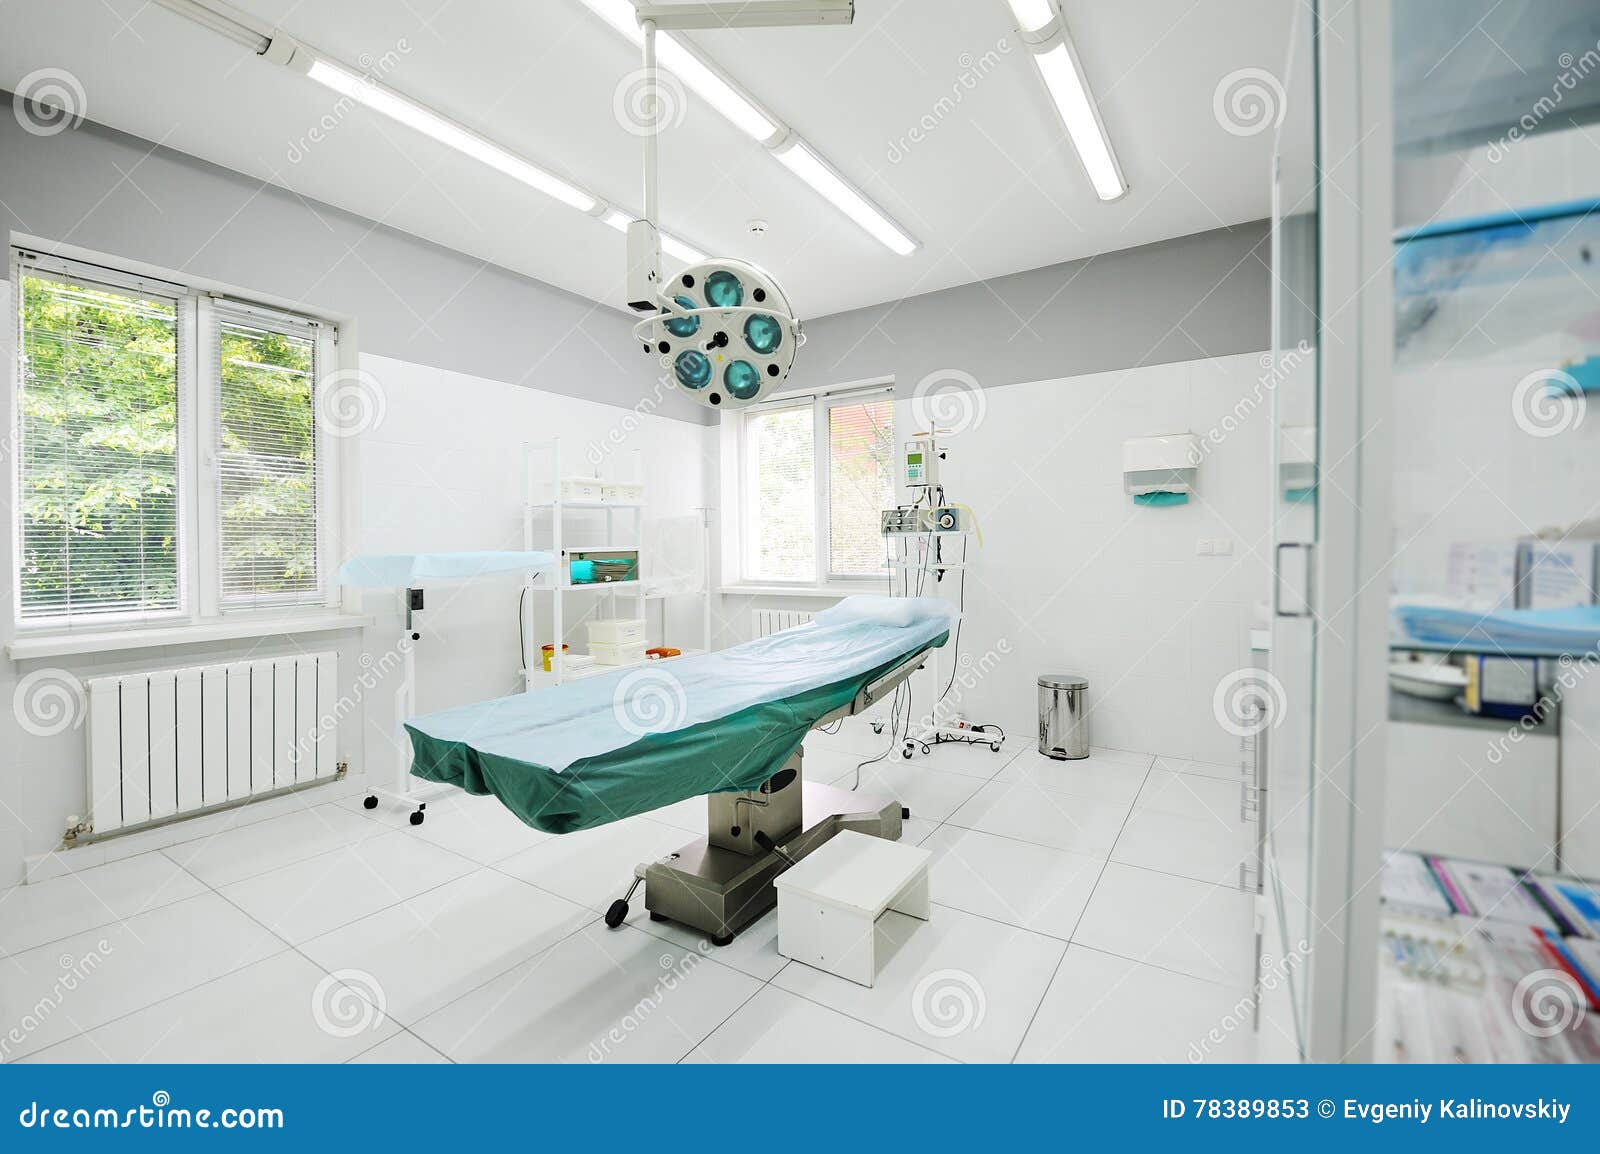 And surgery healthcare polyclinic The Polyclinic